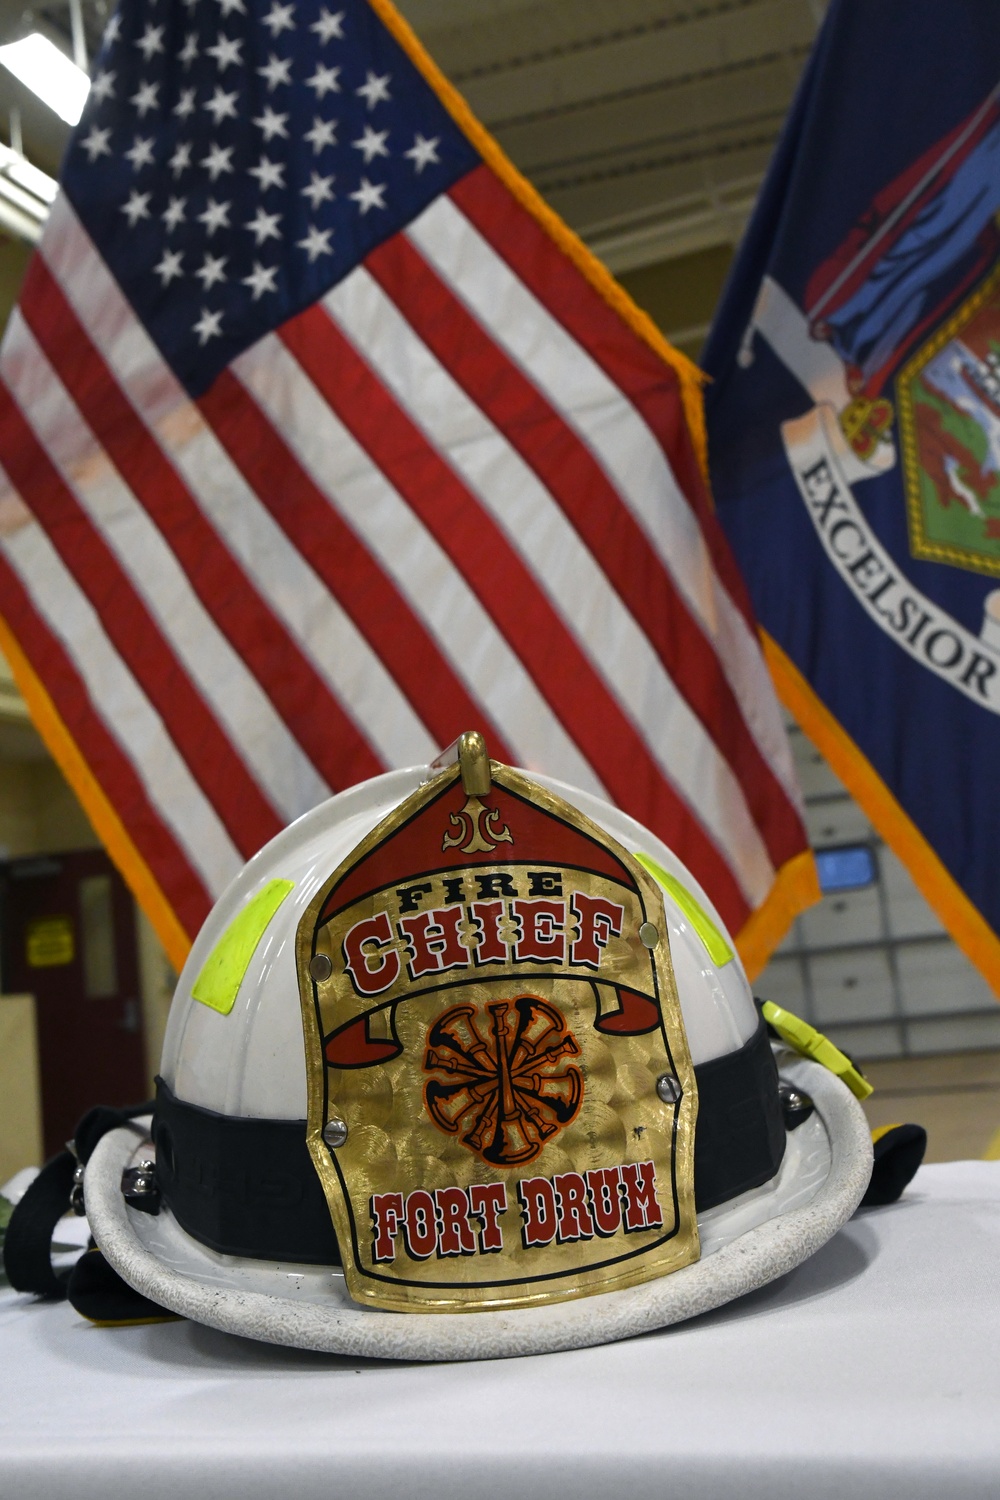 Sackets Harbor native named new Fort Drum fire chief